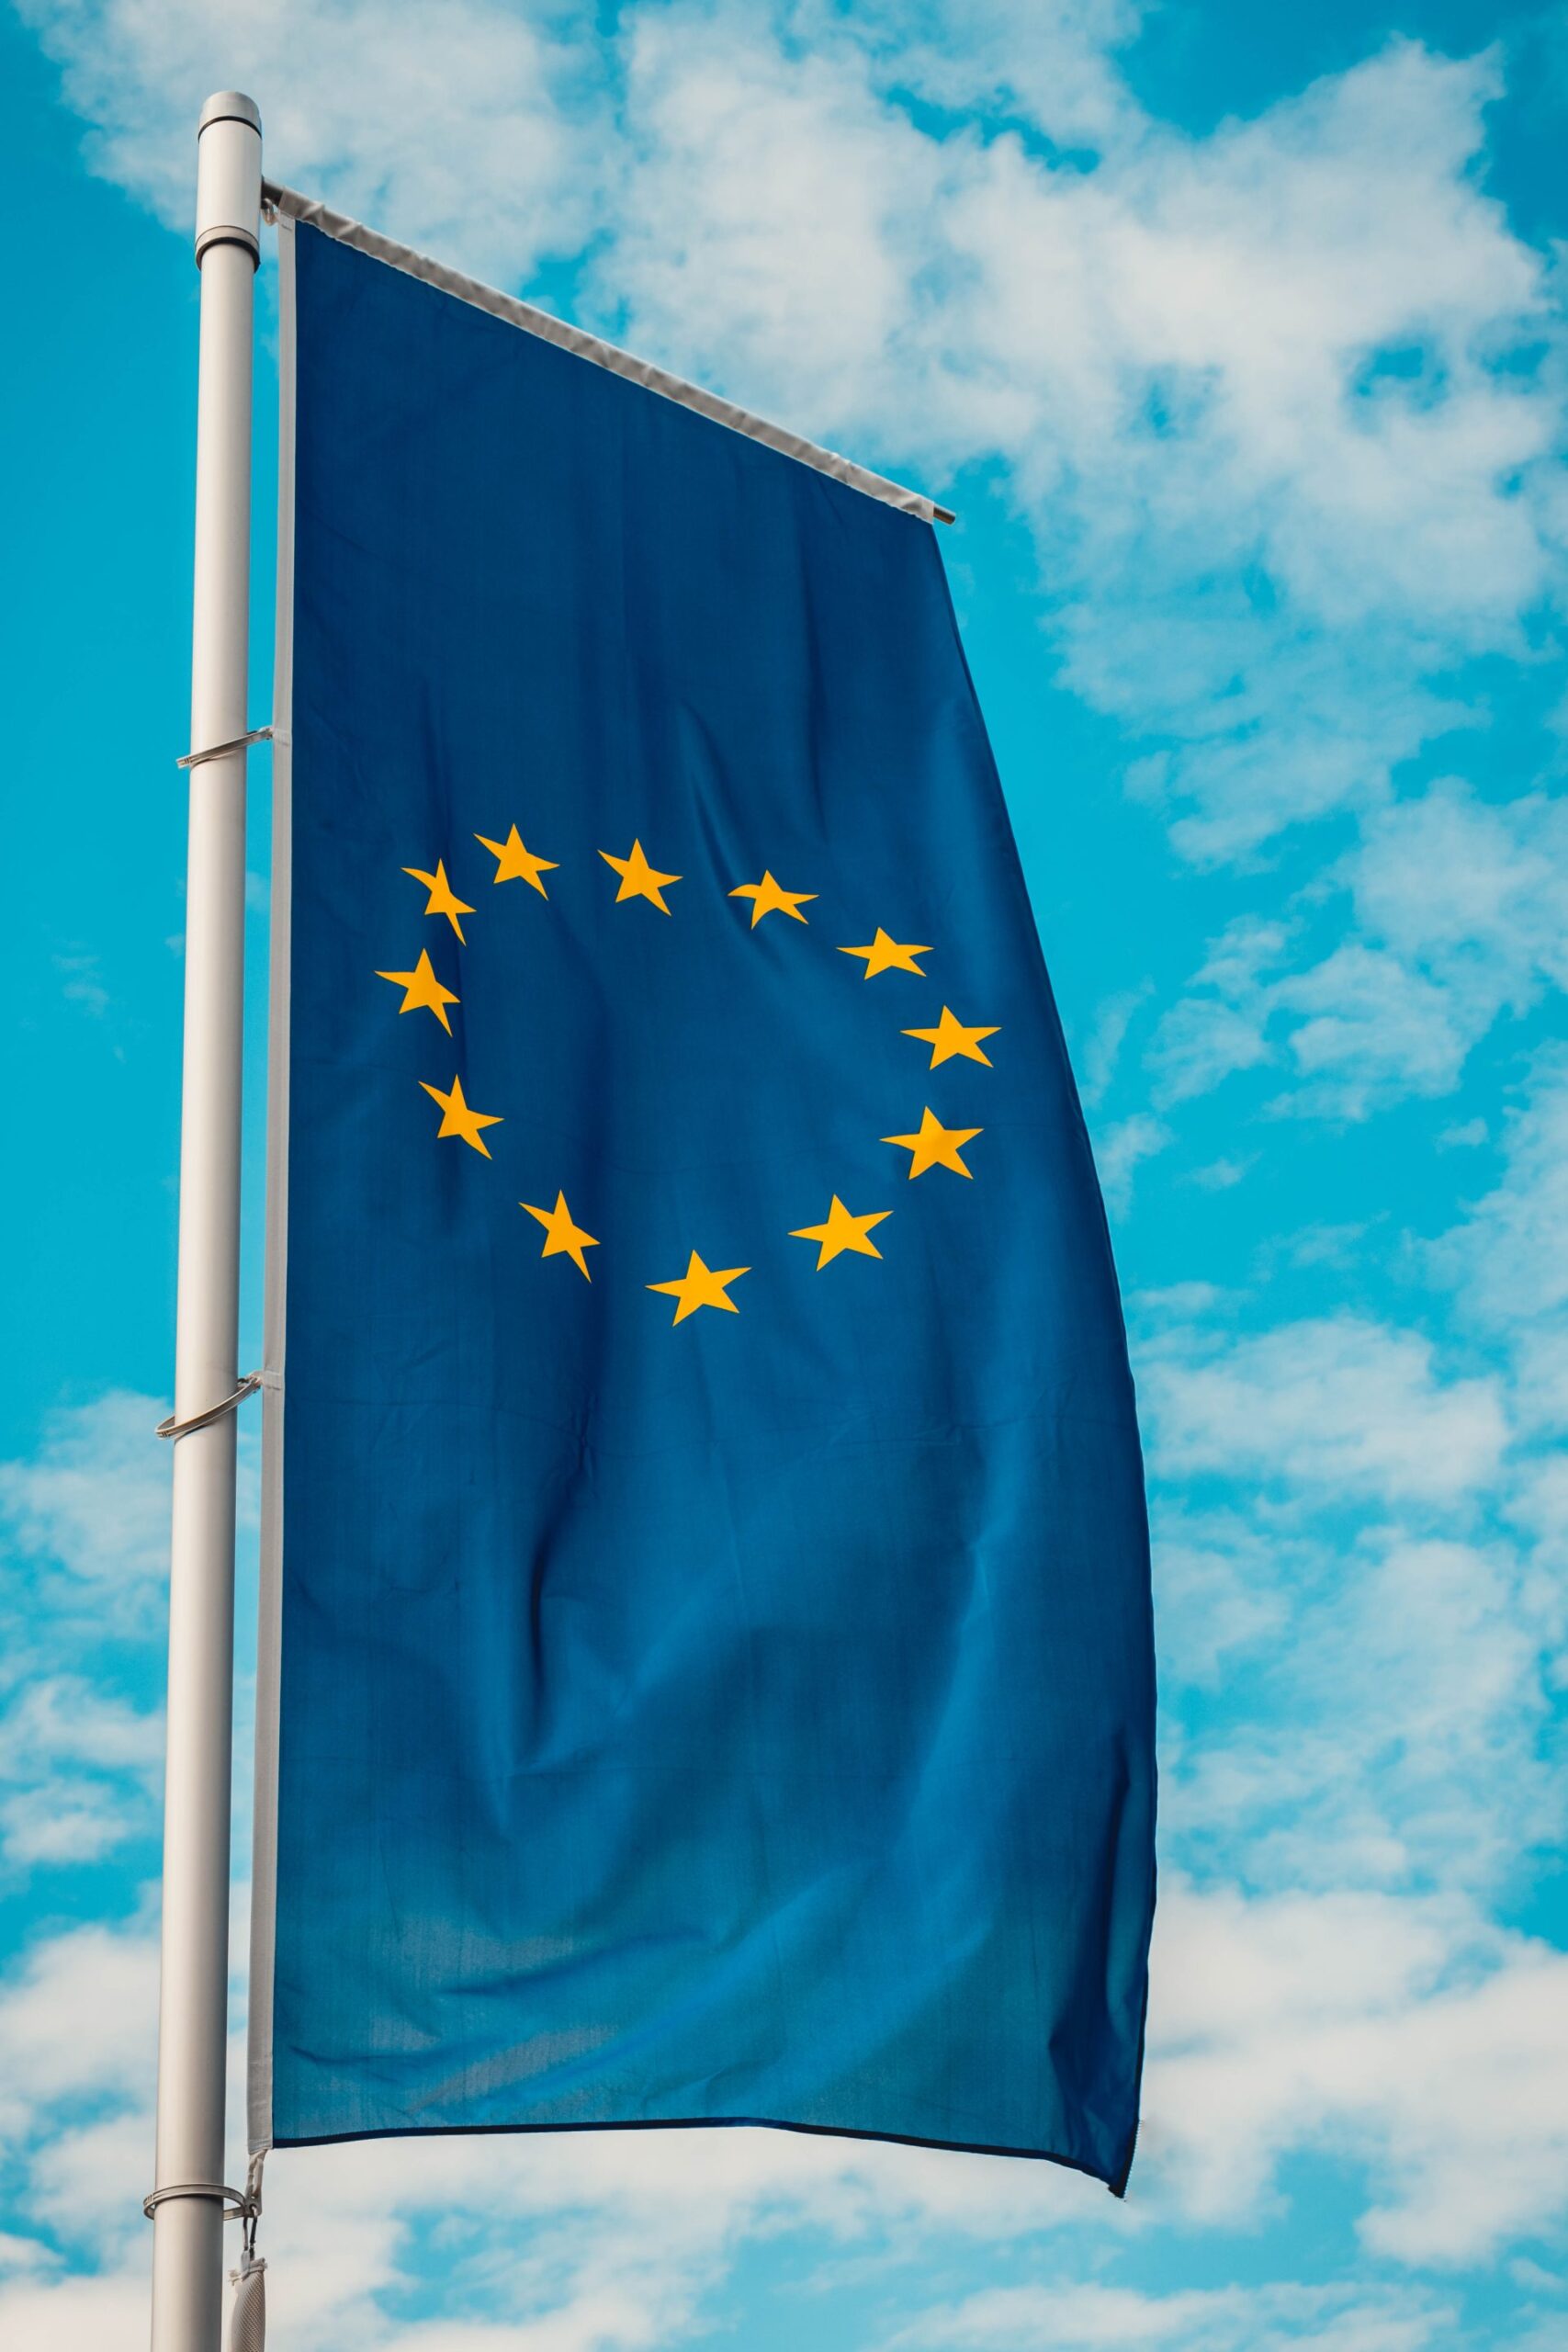 The Data Sharing Coalition welcomes proposed Data Act of European Commission